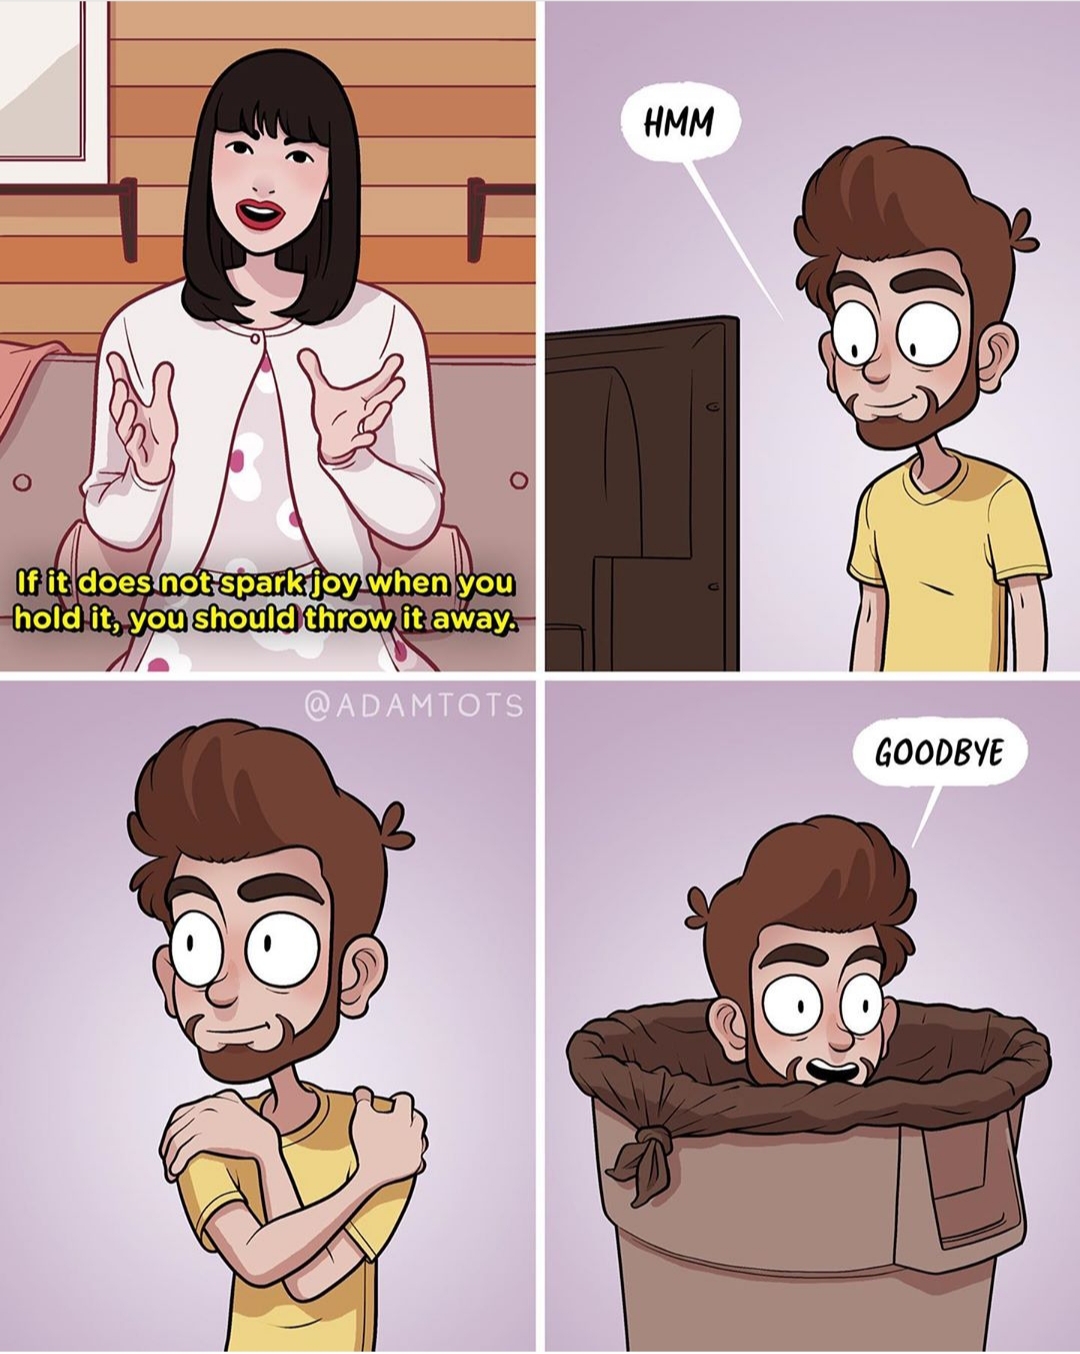 adam ellis marie kondo - Hmm on it does not sparkloy when you hold it, you should throw it away. Wadamtots Goodbye